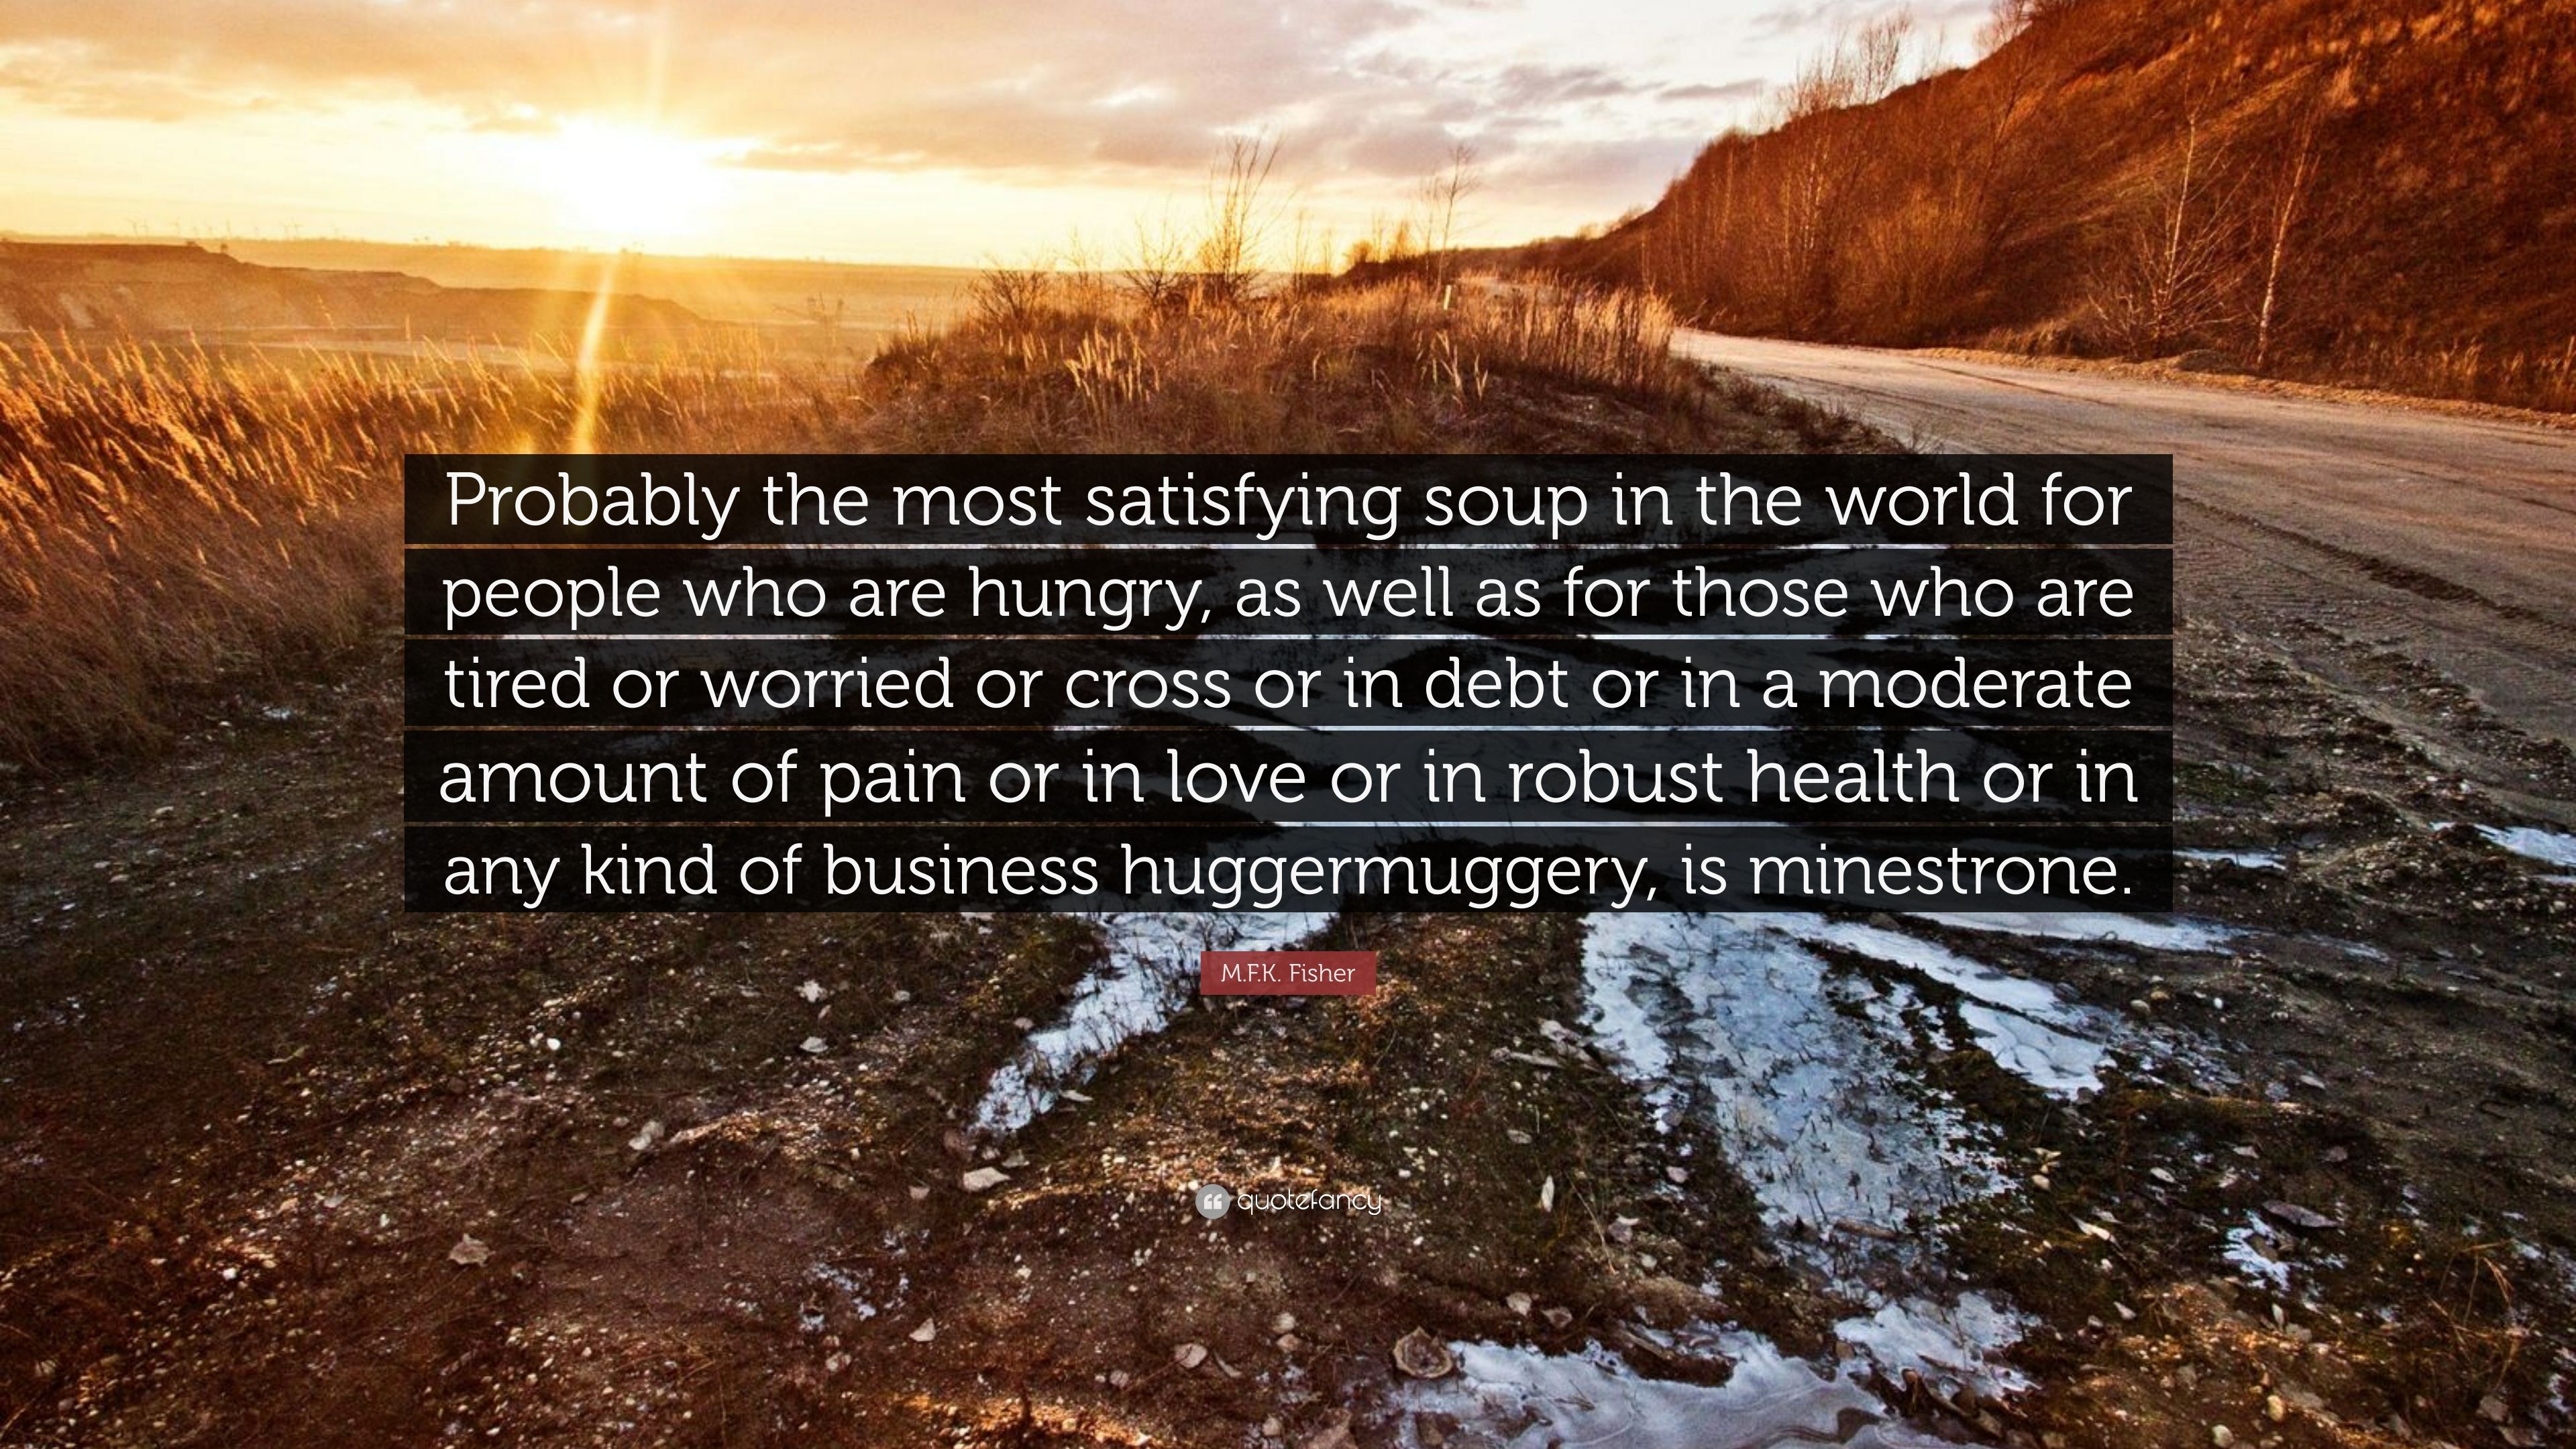 M.F.K. Fisher Quote: “Probably the most satisfying soup in the world